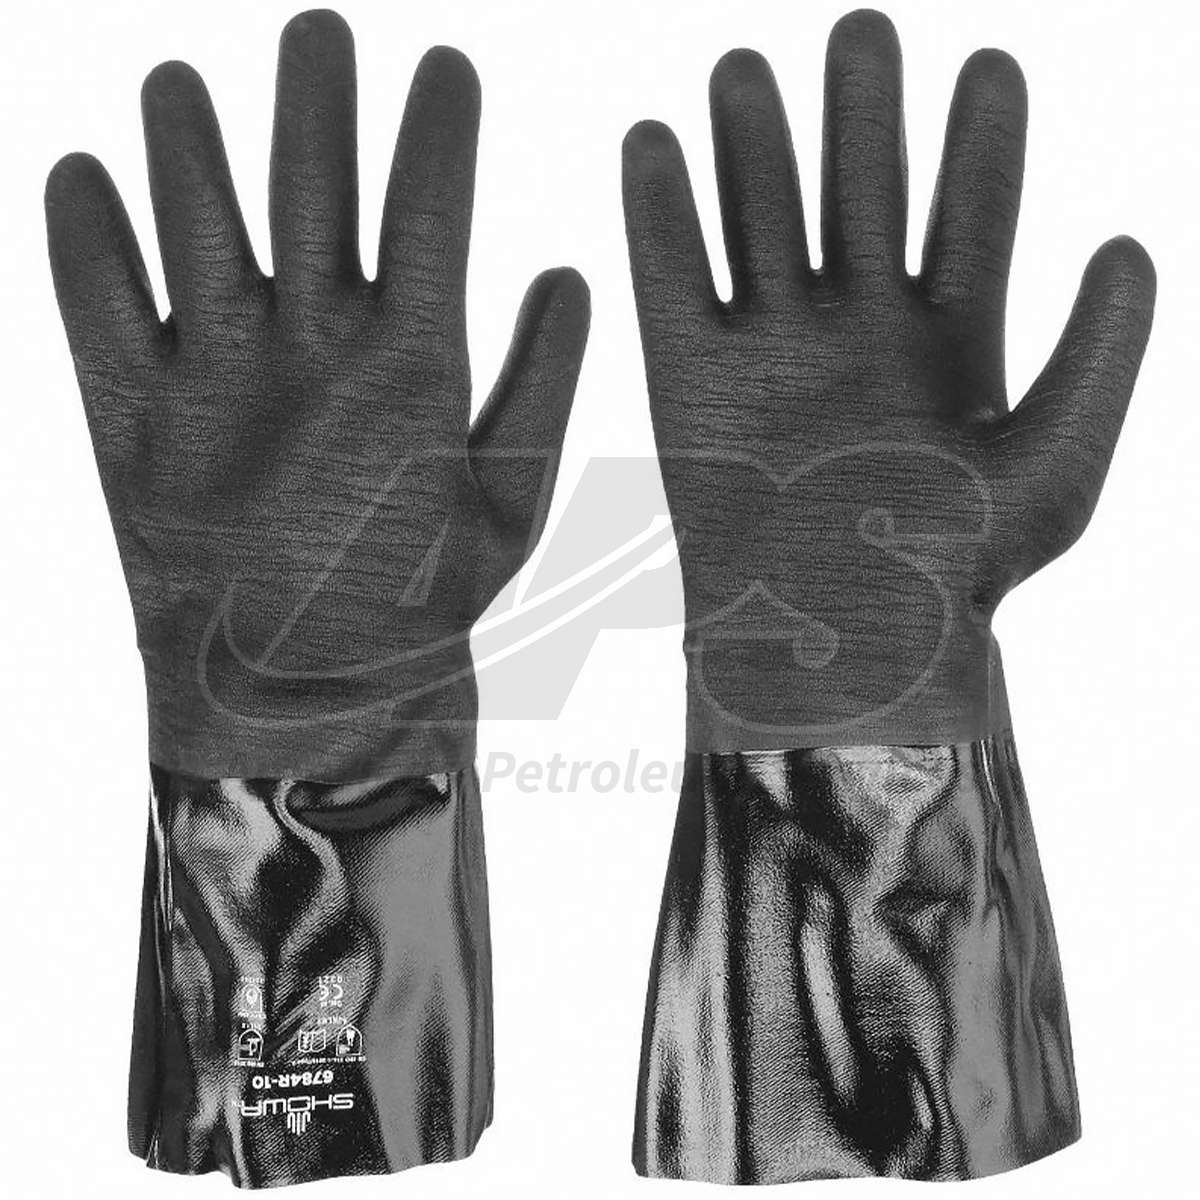 NEOPRENE CHEMICAL RESISTANT GLOVES (LONG ROUGH SURE GRIP FINISH, SIZE 10,  14 GLOVE LENGTH)